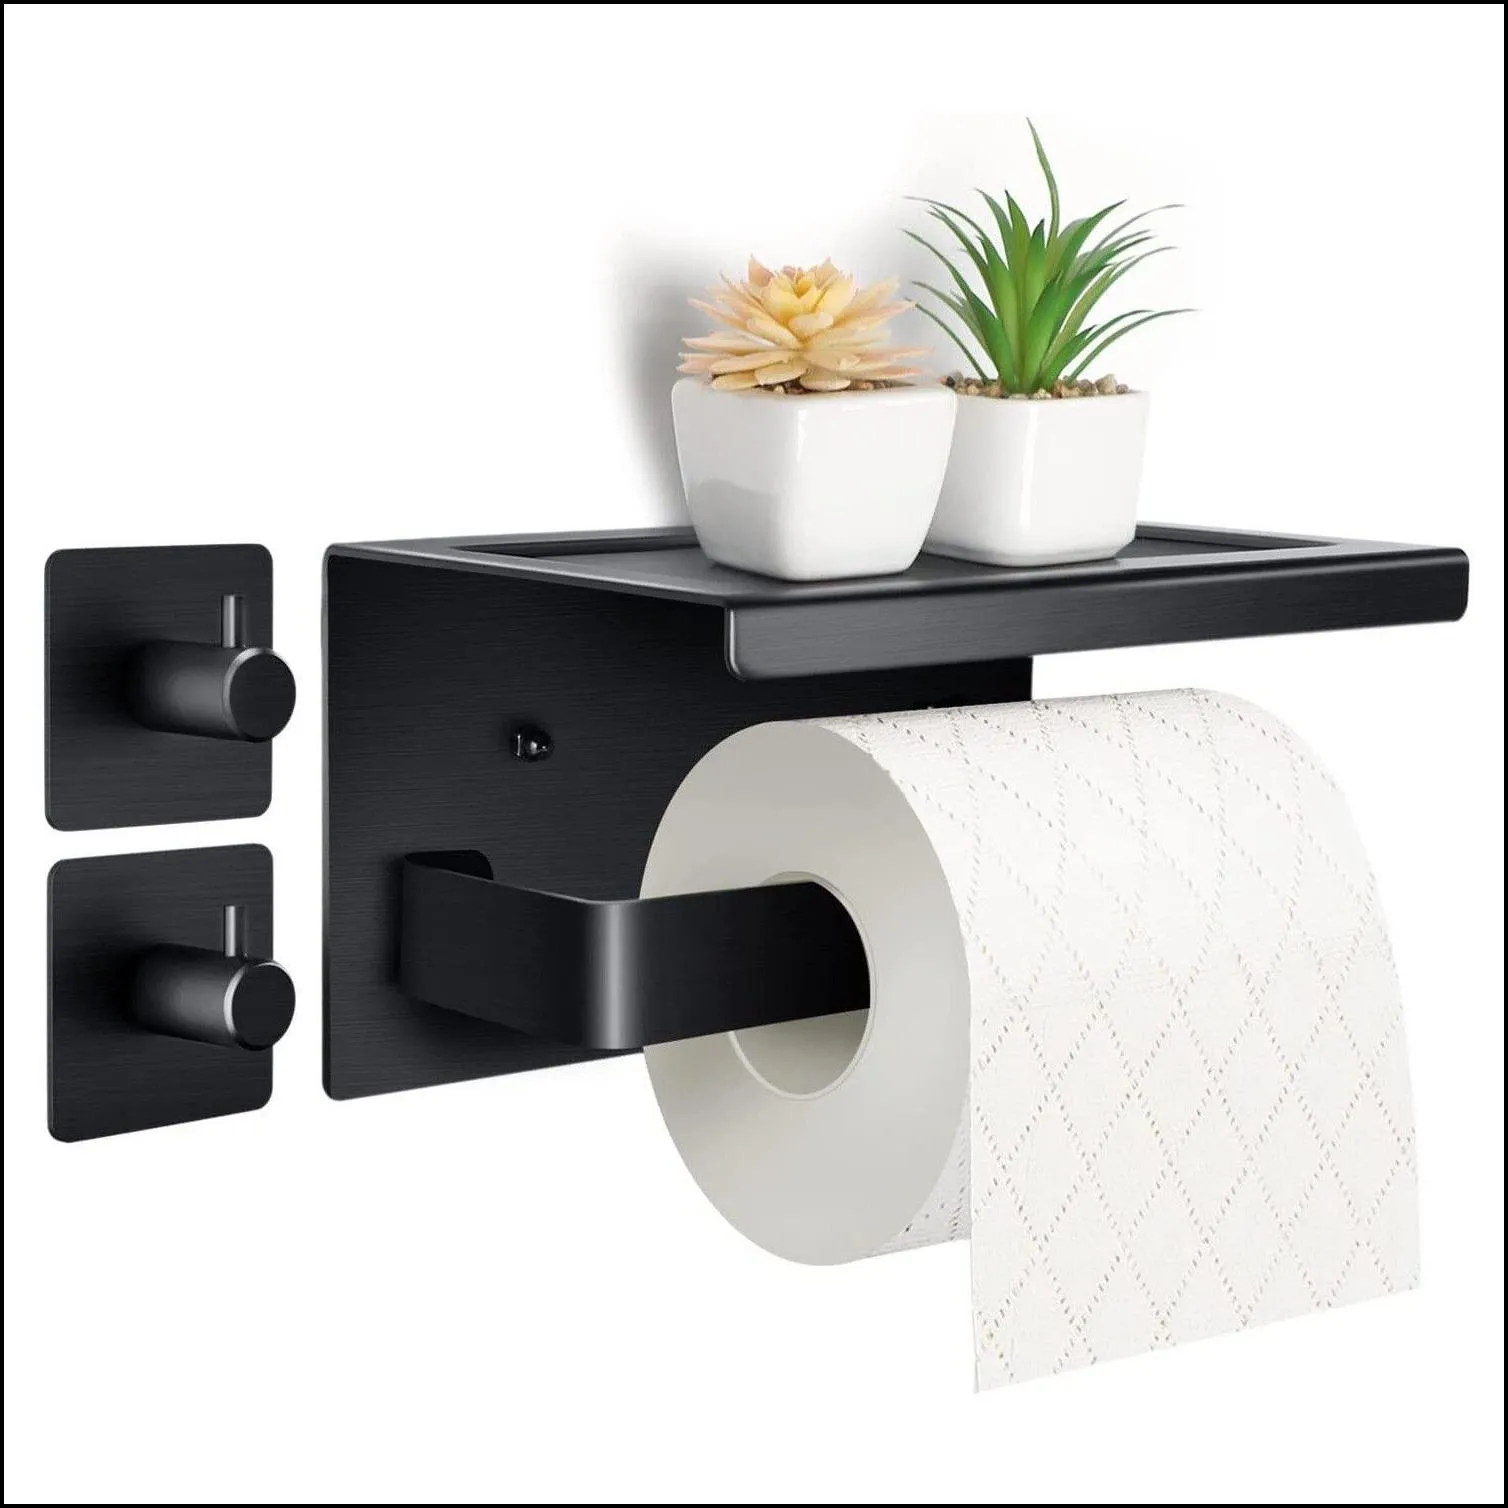 stainless steel punch toilet boxes paper shelf bathroom kitchen wallmounted sticky storage box roll paper holder hh22296